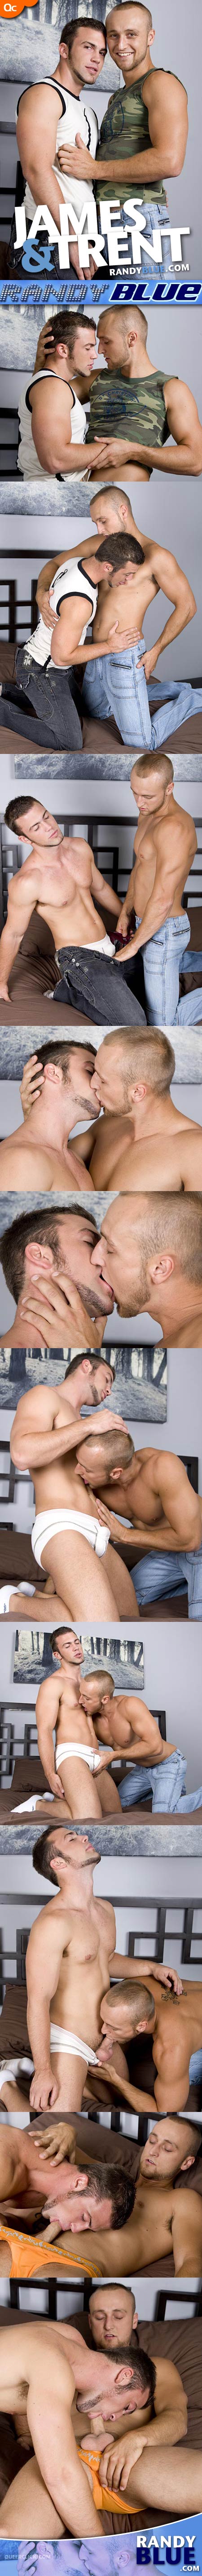 James and Trent at RandyBlue.com